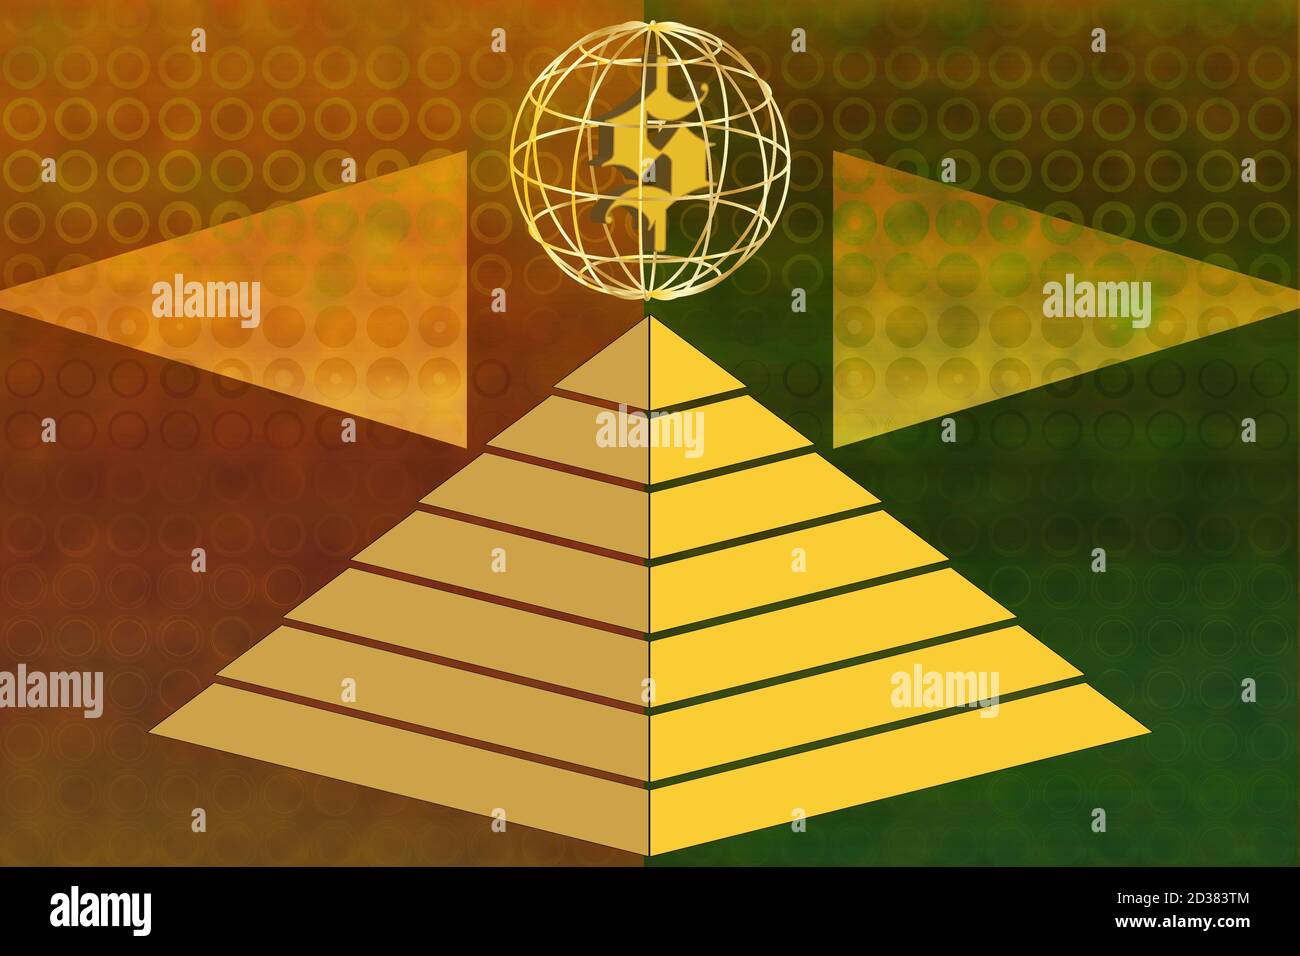 An abstract 3d pyramid shape background image. Stock Photo